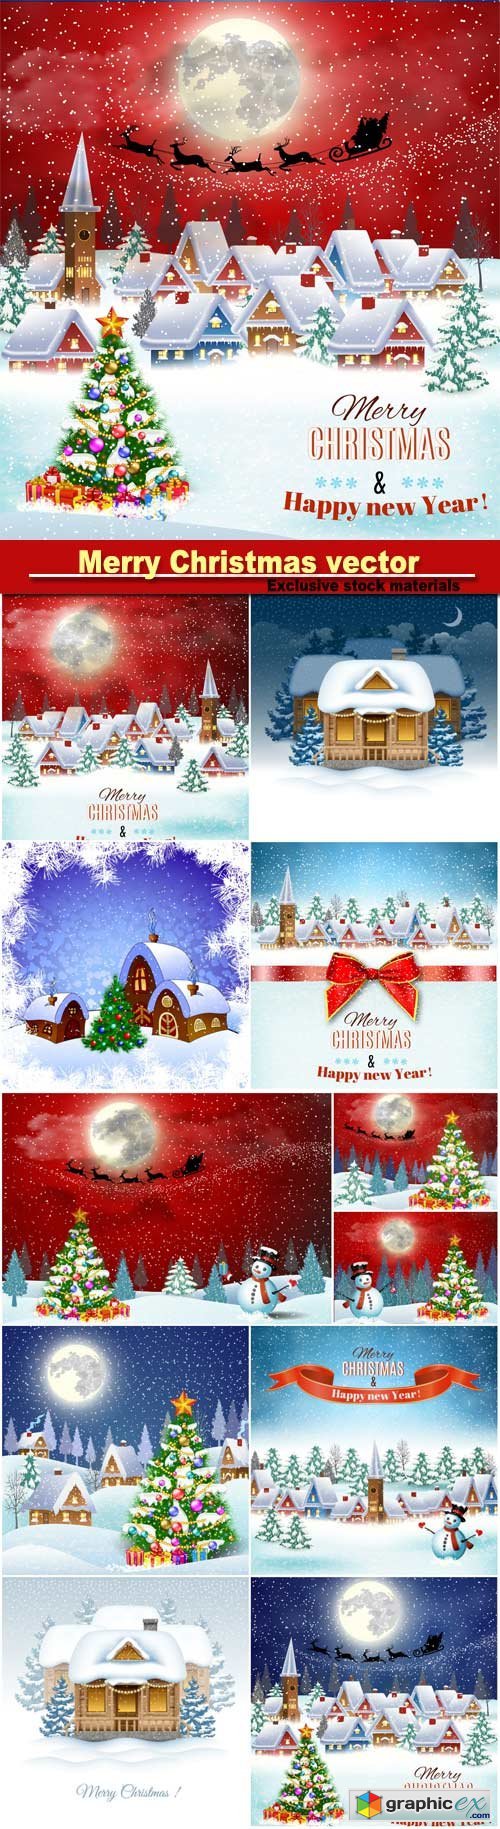 Christmas backgrounds in vector winter landscape with village houses and snowmen